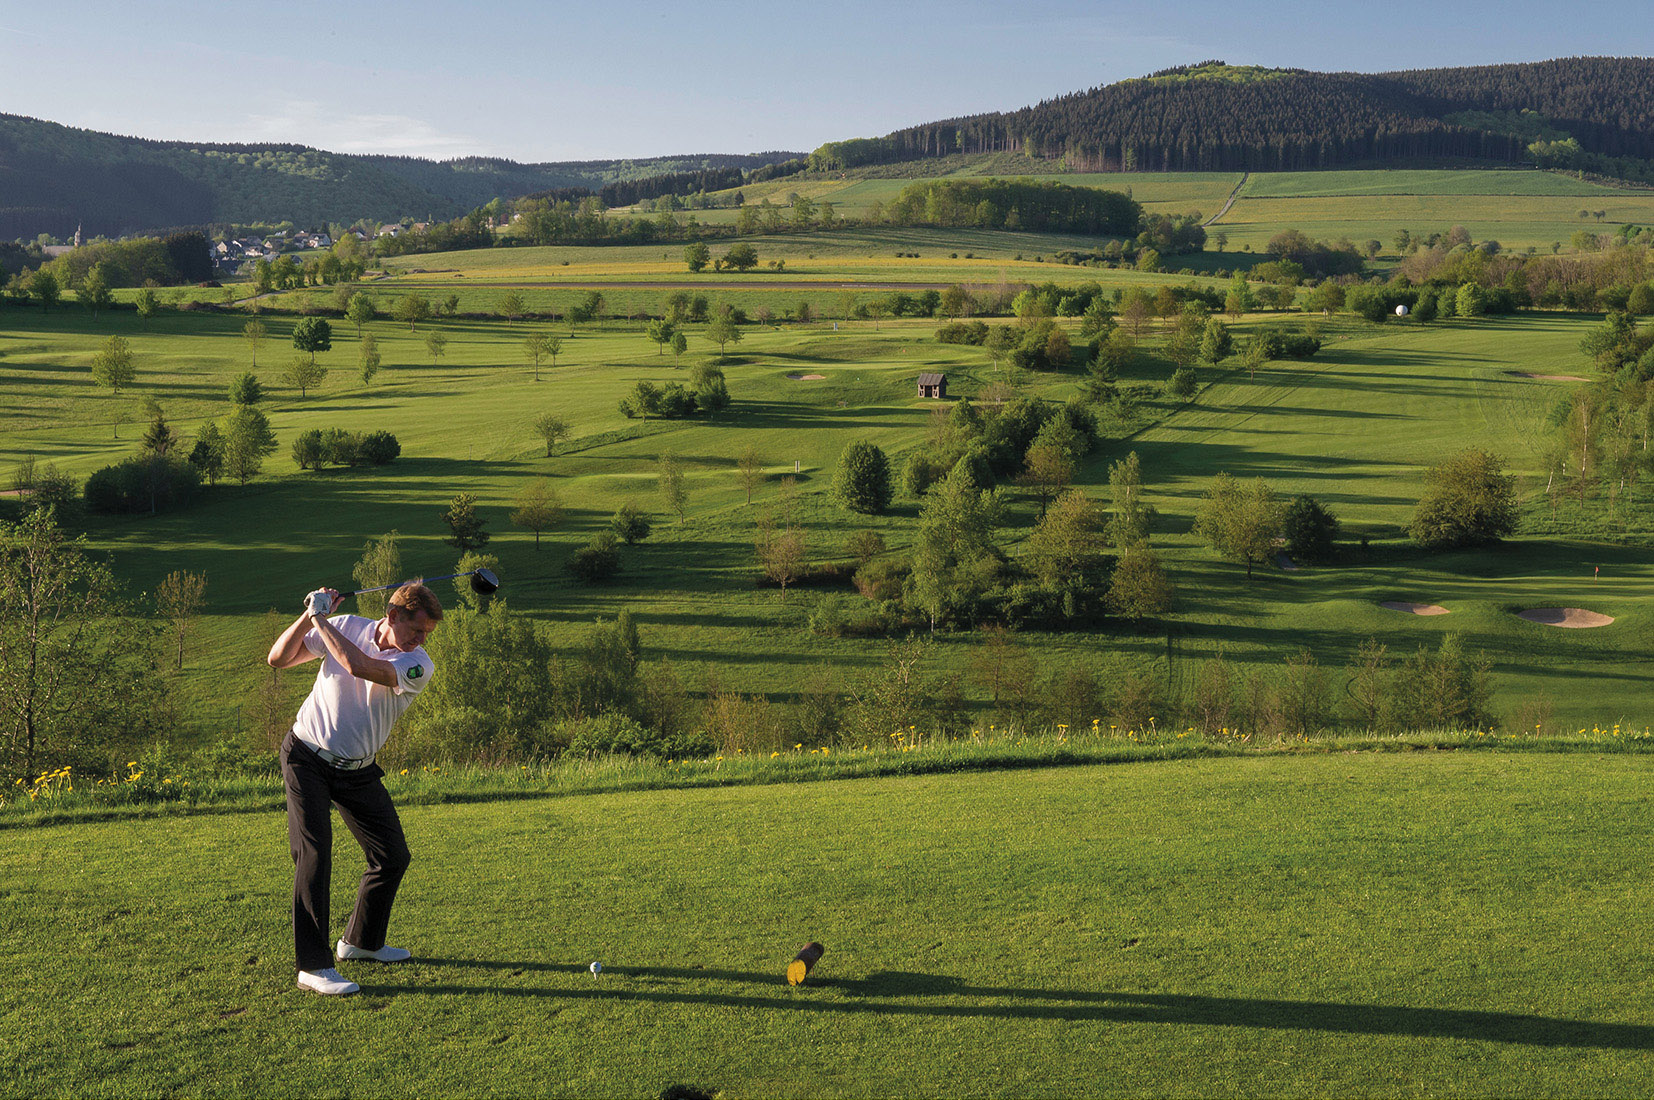 Book your best golf experience now at an unbeatable price